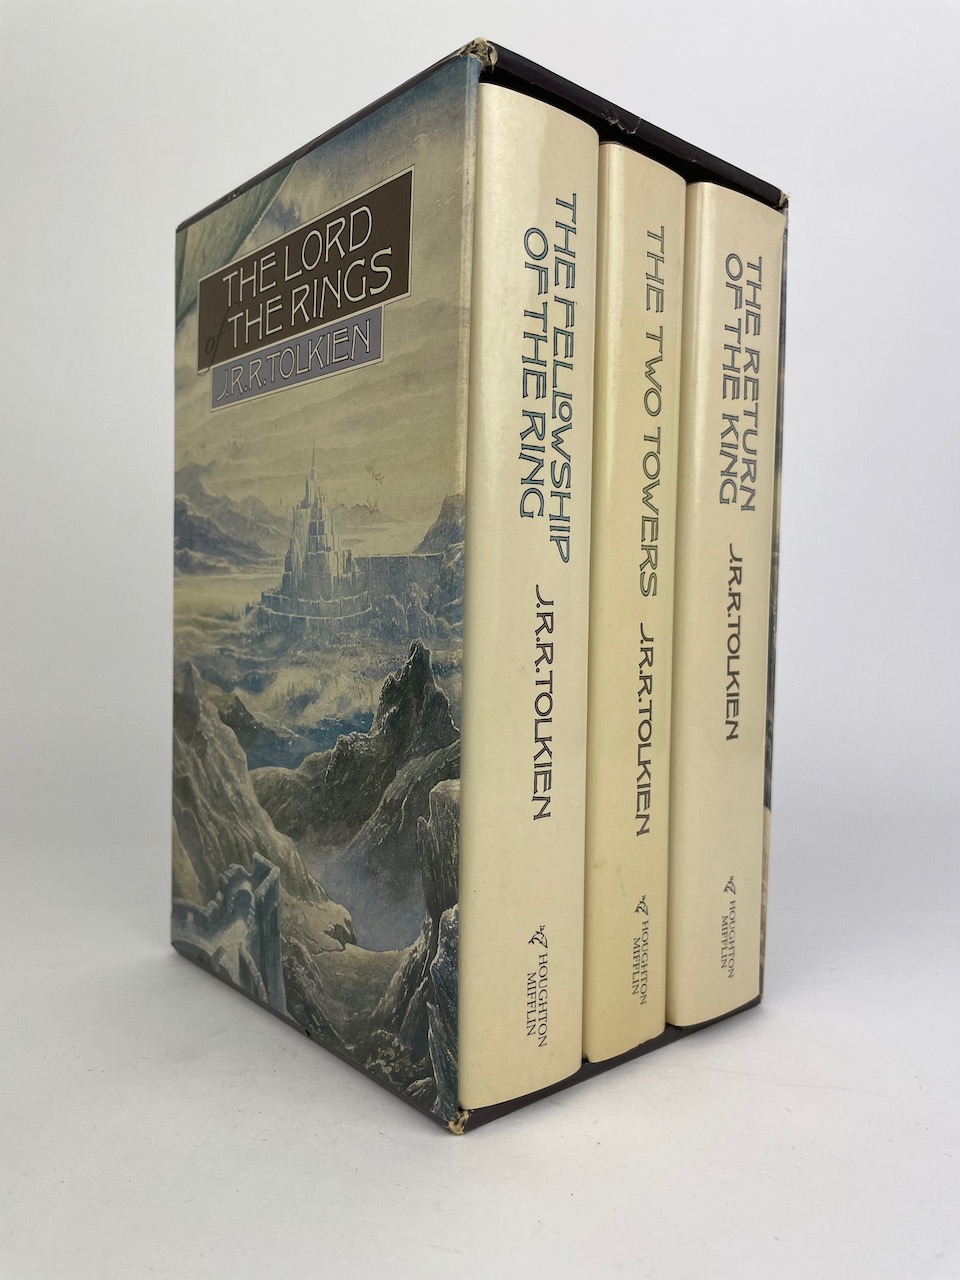 The Lord of the Rings JRR Tolkien Alan Lee set from 1988, by Houghton Mifflin 1